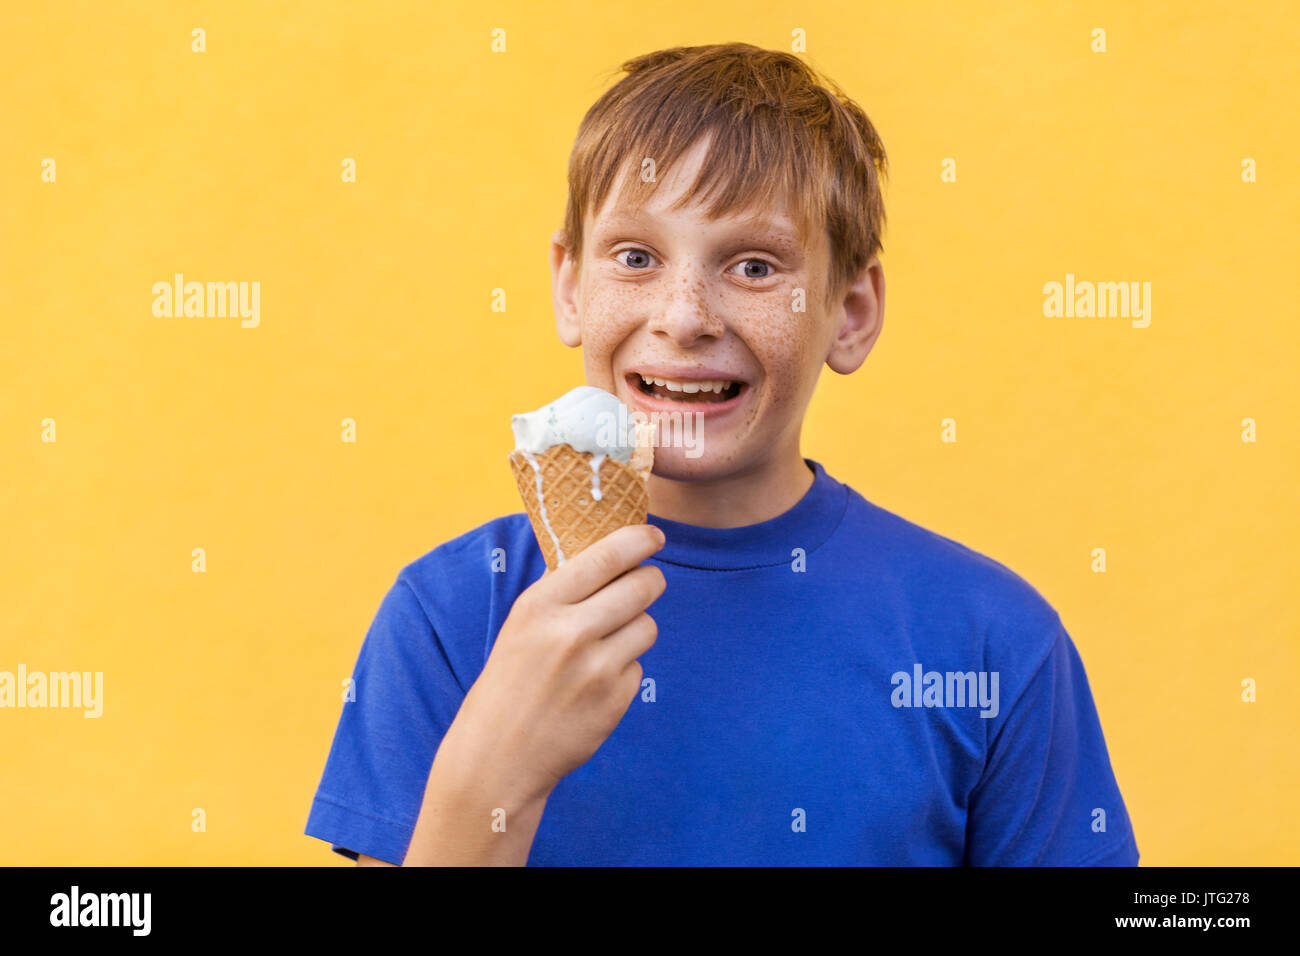 The blonde beautiful boy with freckles and blue T-shirt holds ice cream looking at camera with toothy smile. Studio shot, isolated on a yellow backgro Stock Photo